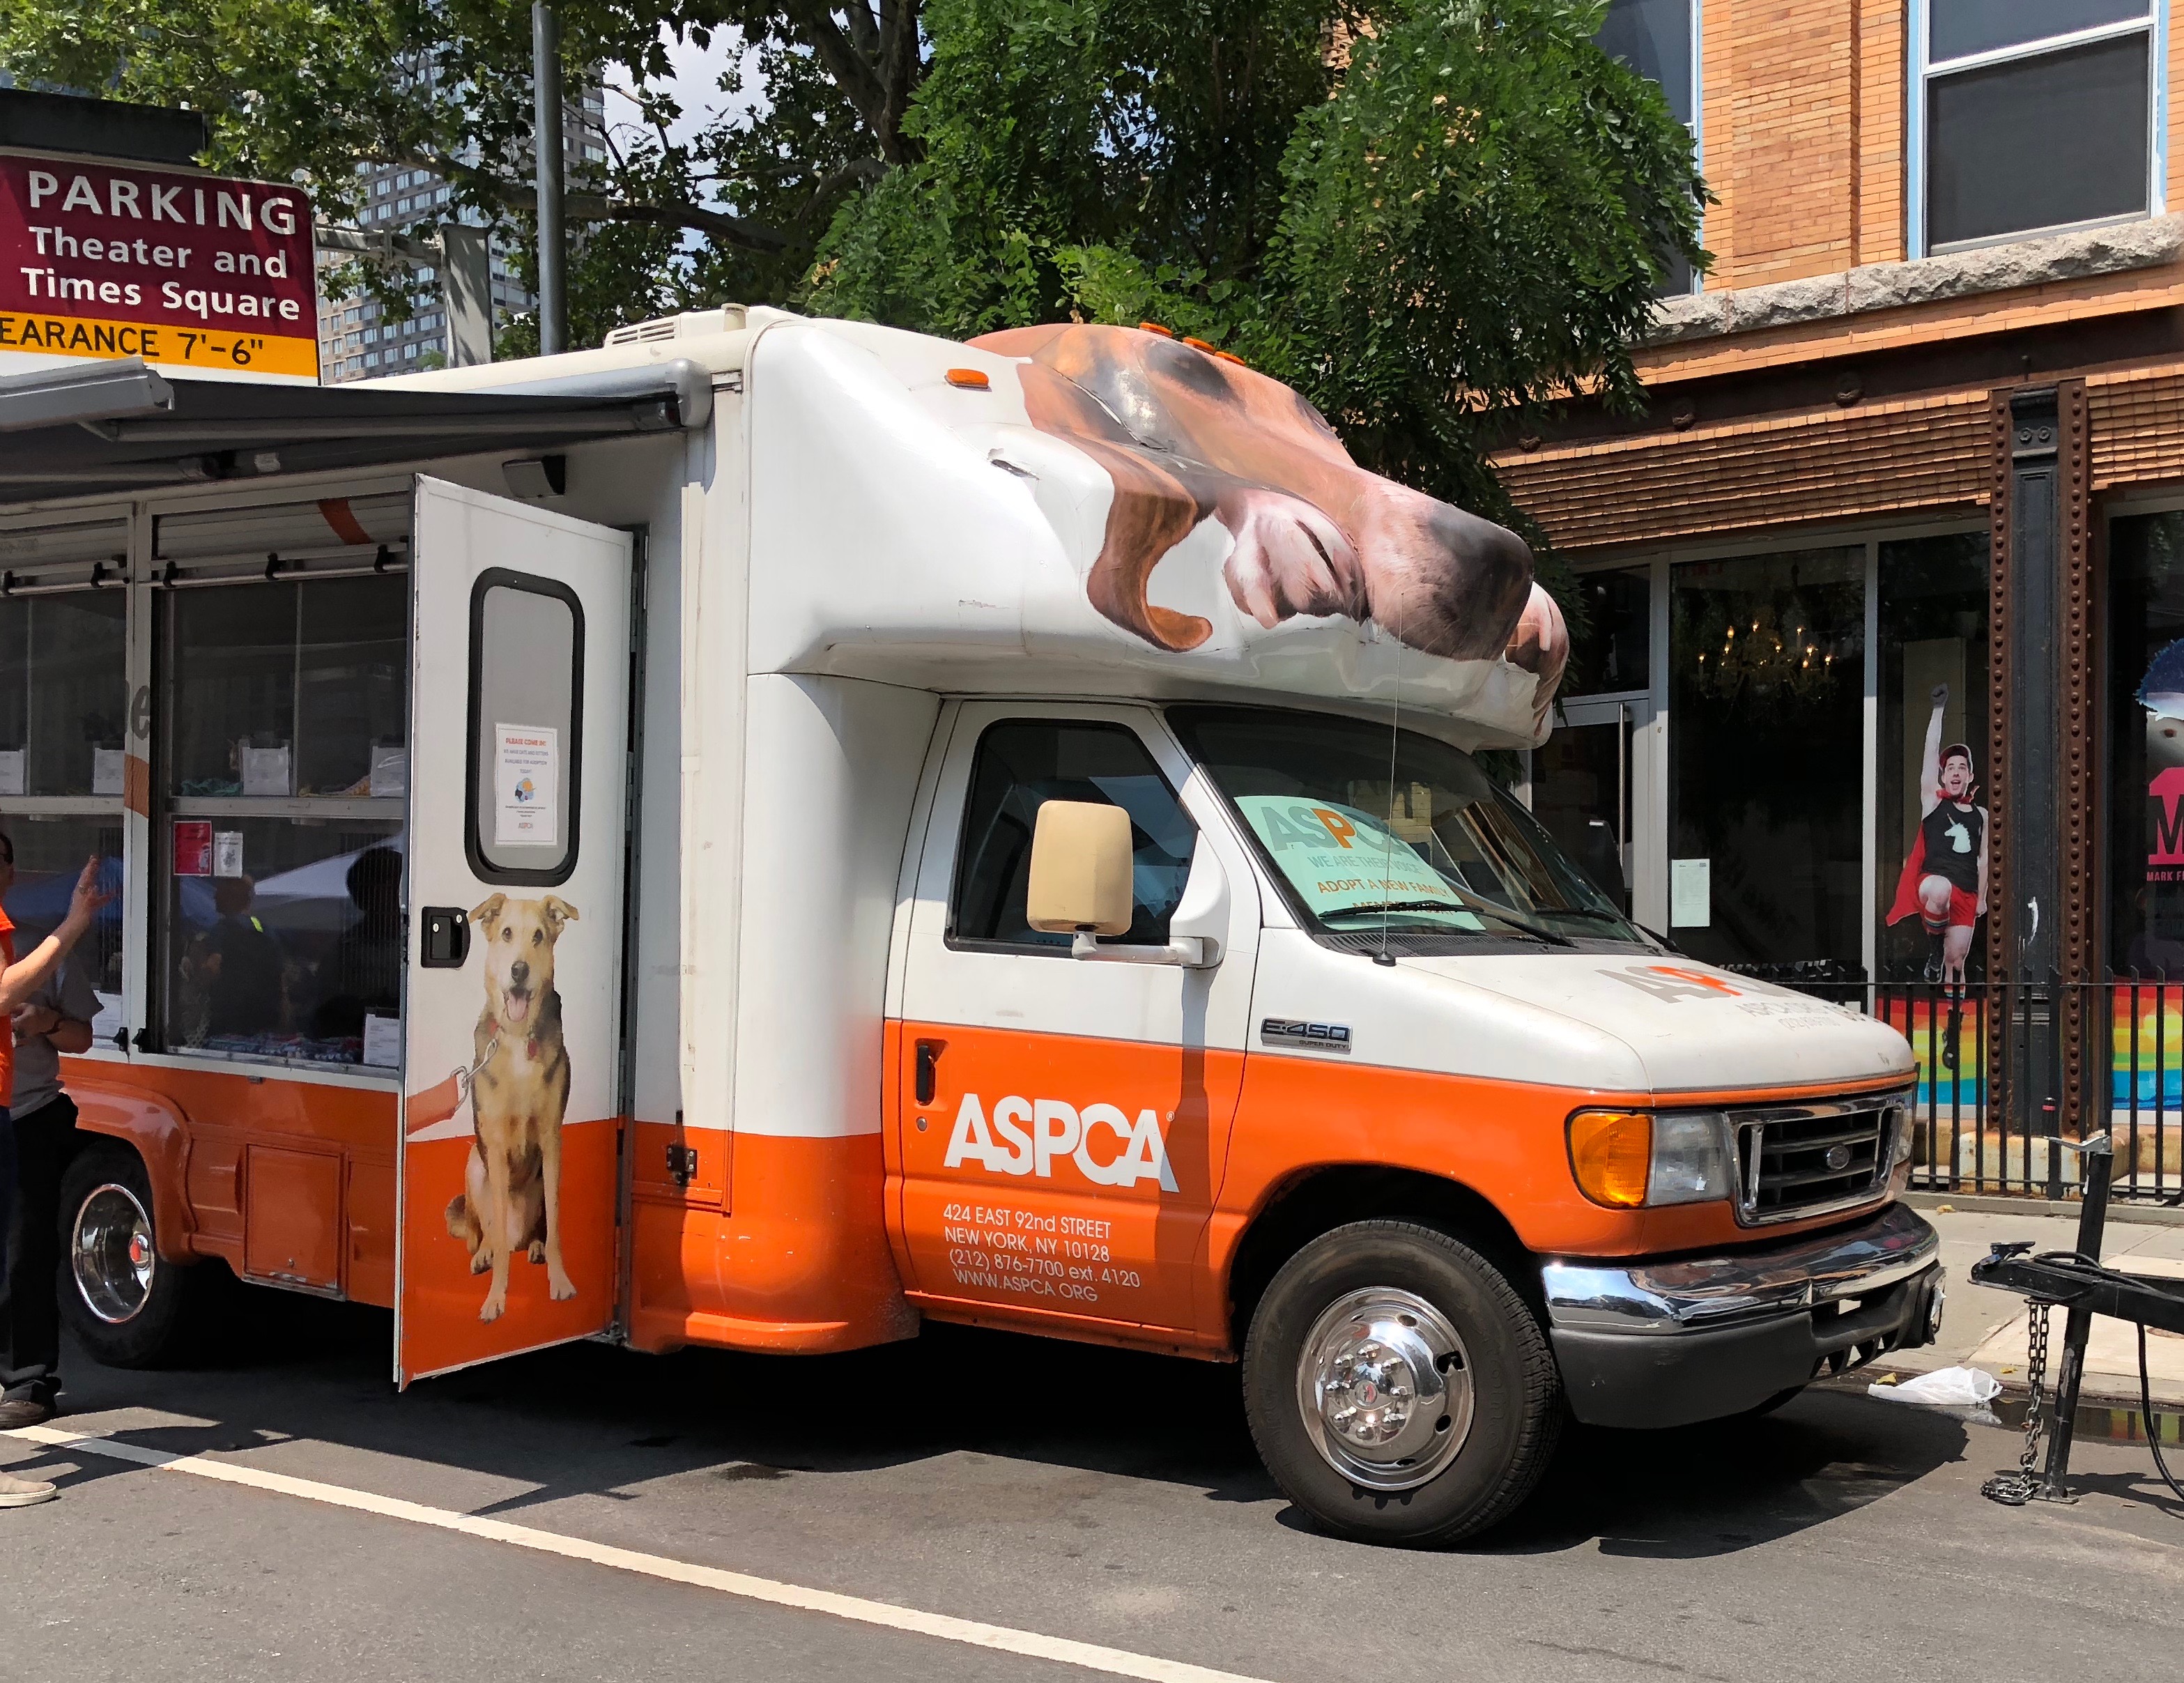 A Visit To The Aspca Mobile Adoption Center In Nyc Channel Kindness